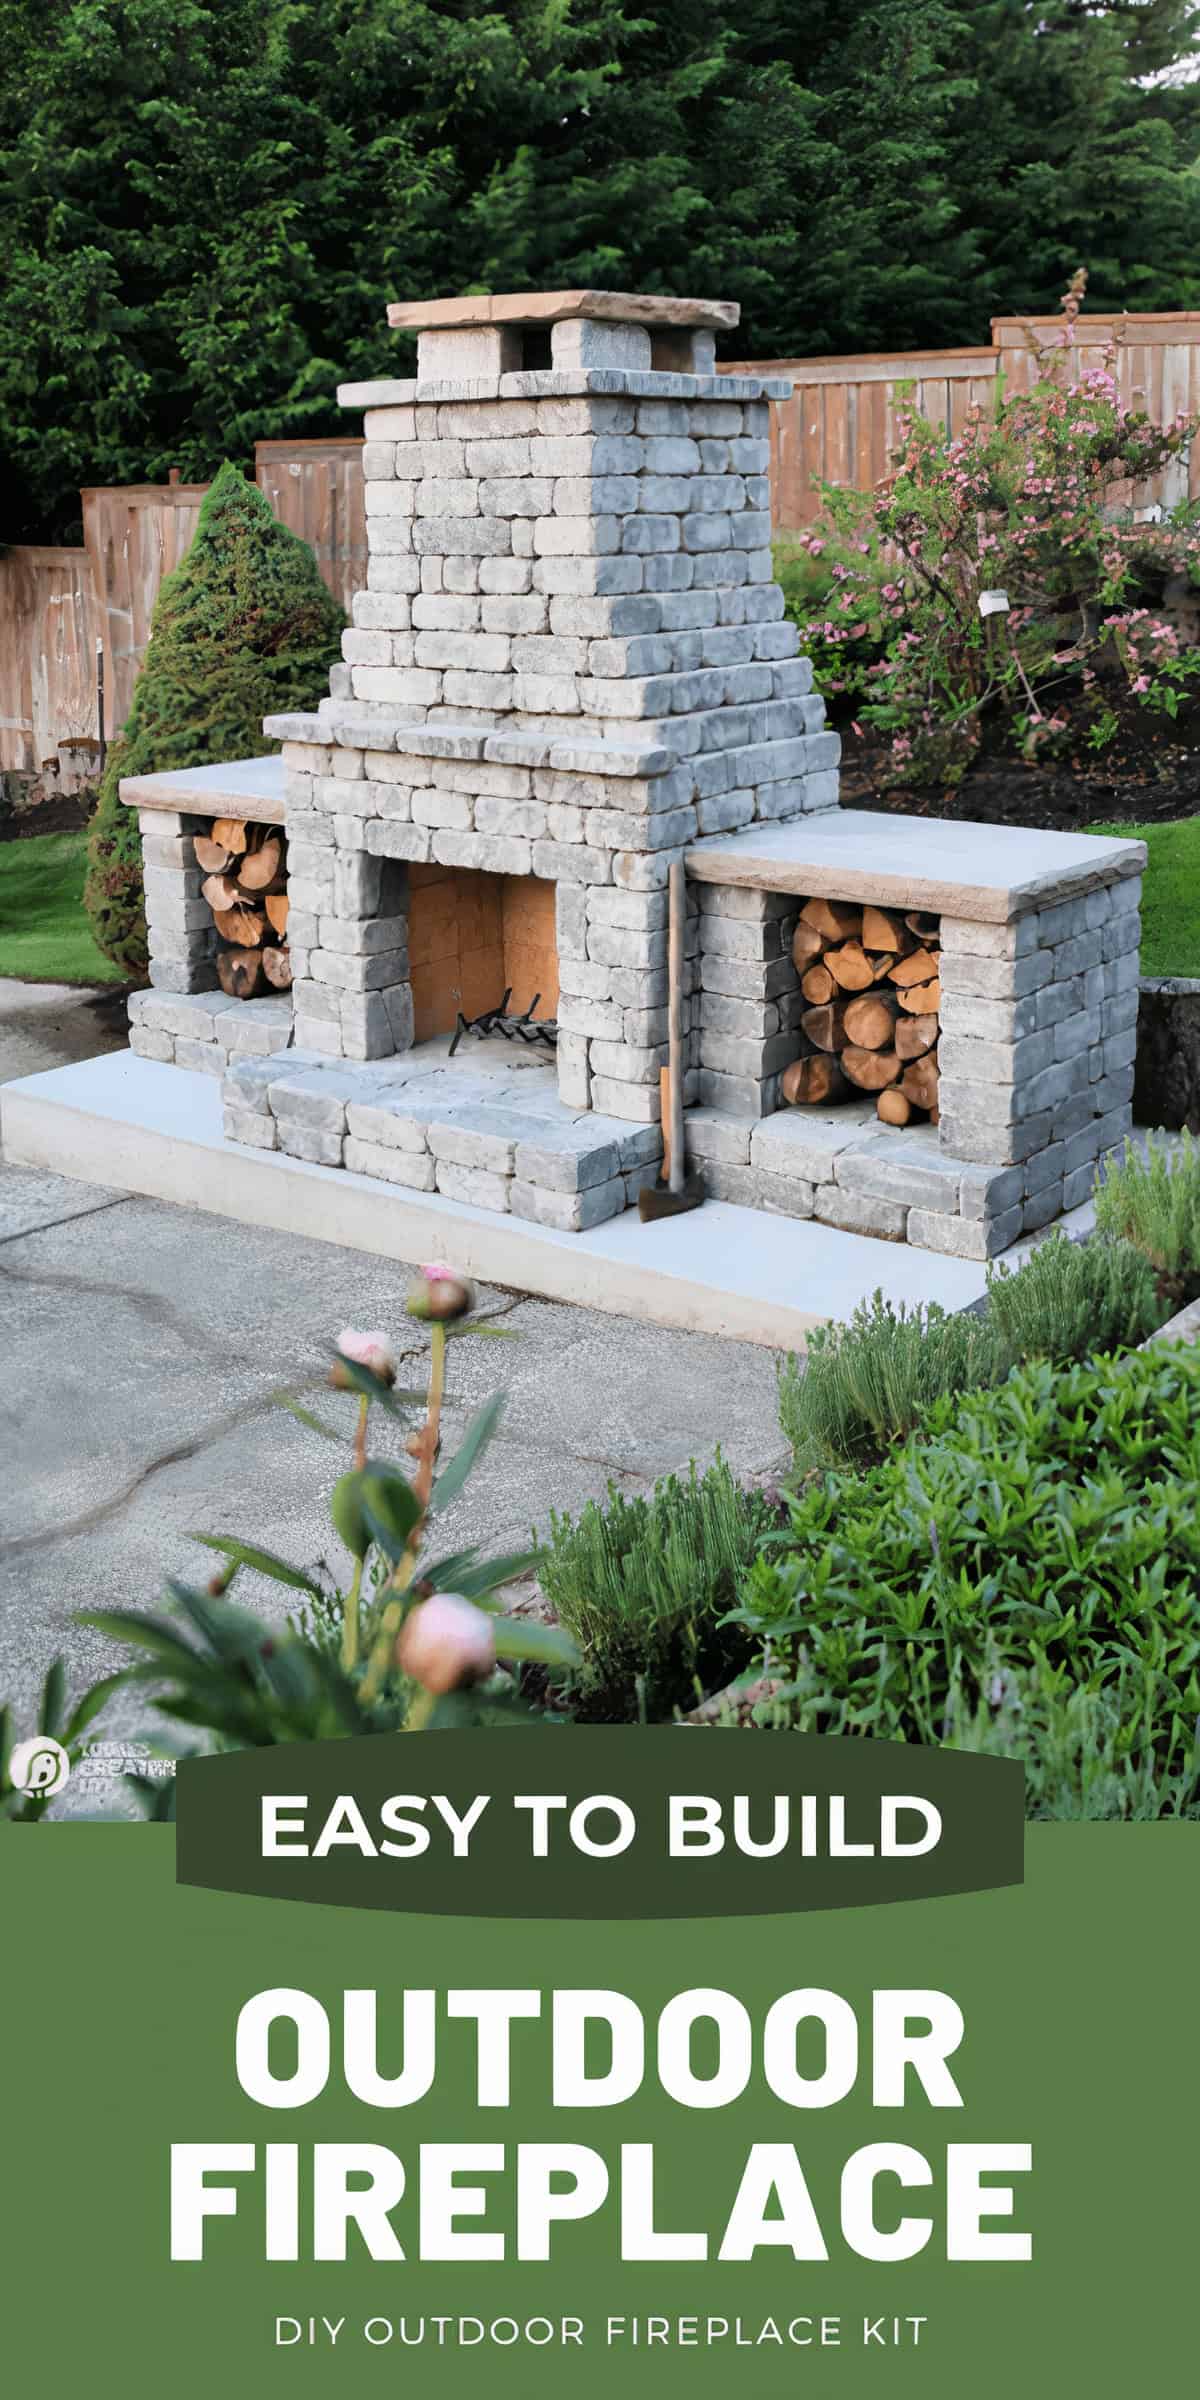 Grey stone outdoor fireplace